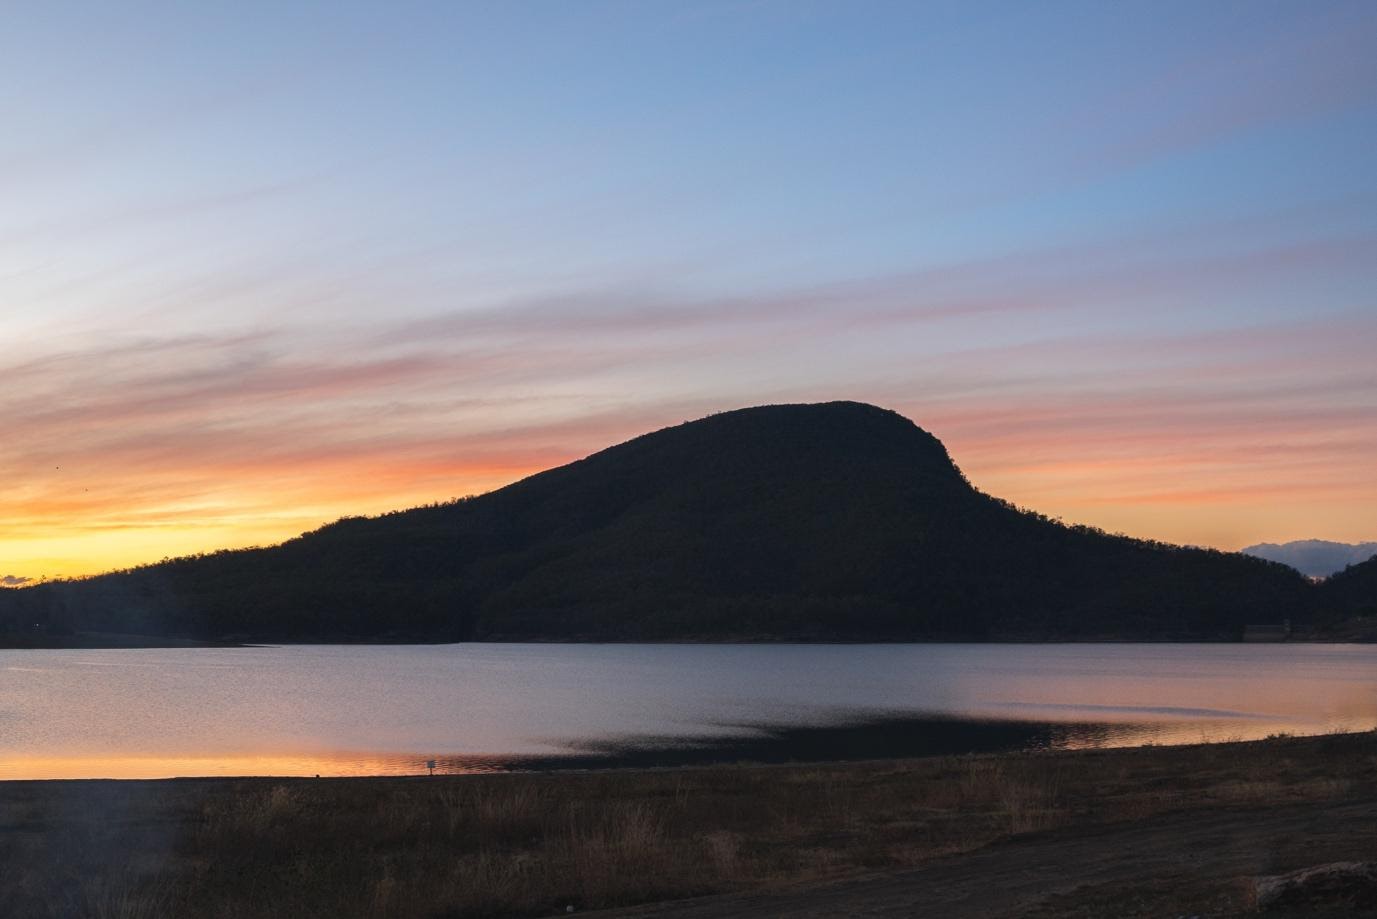 View of the Sunset over Lake Moogerah